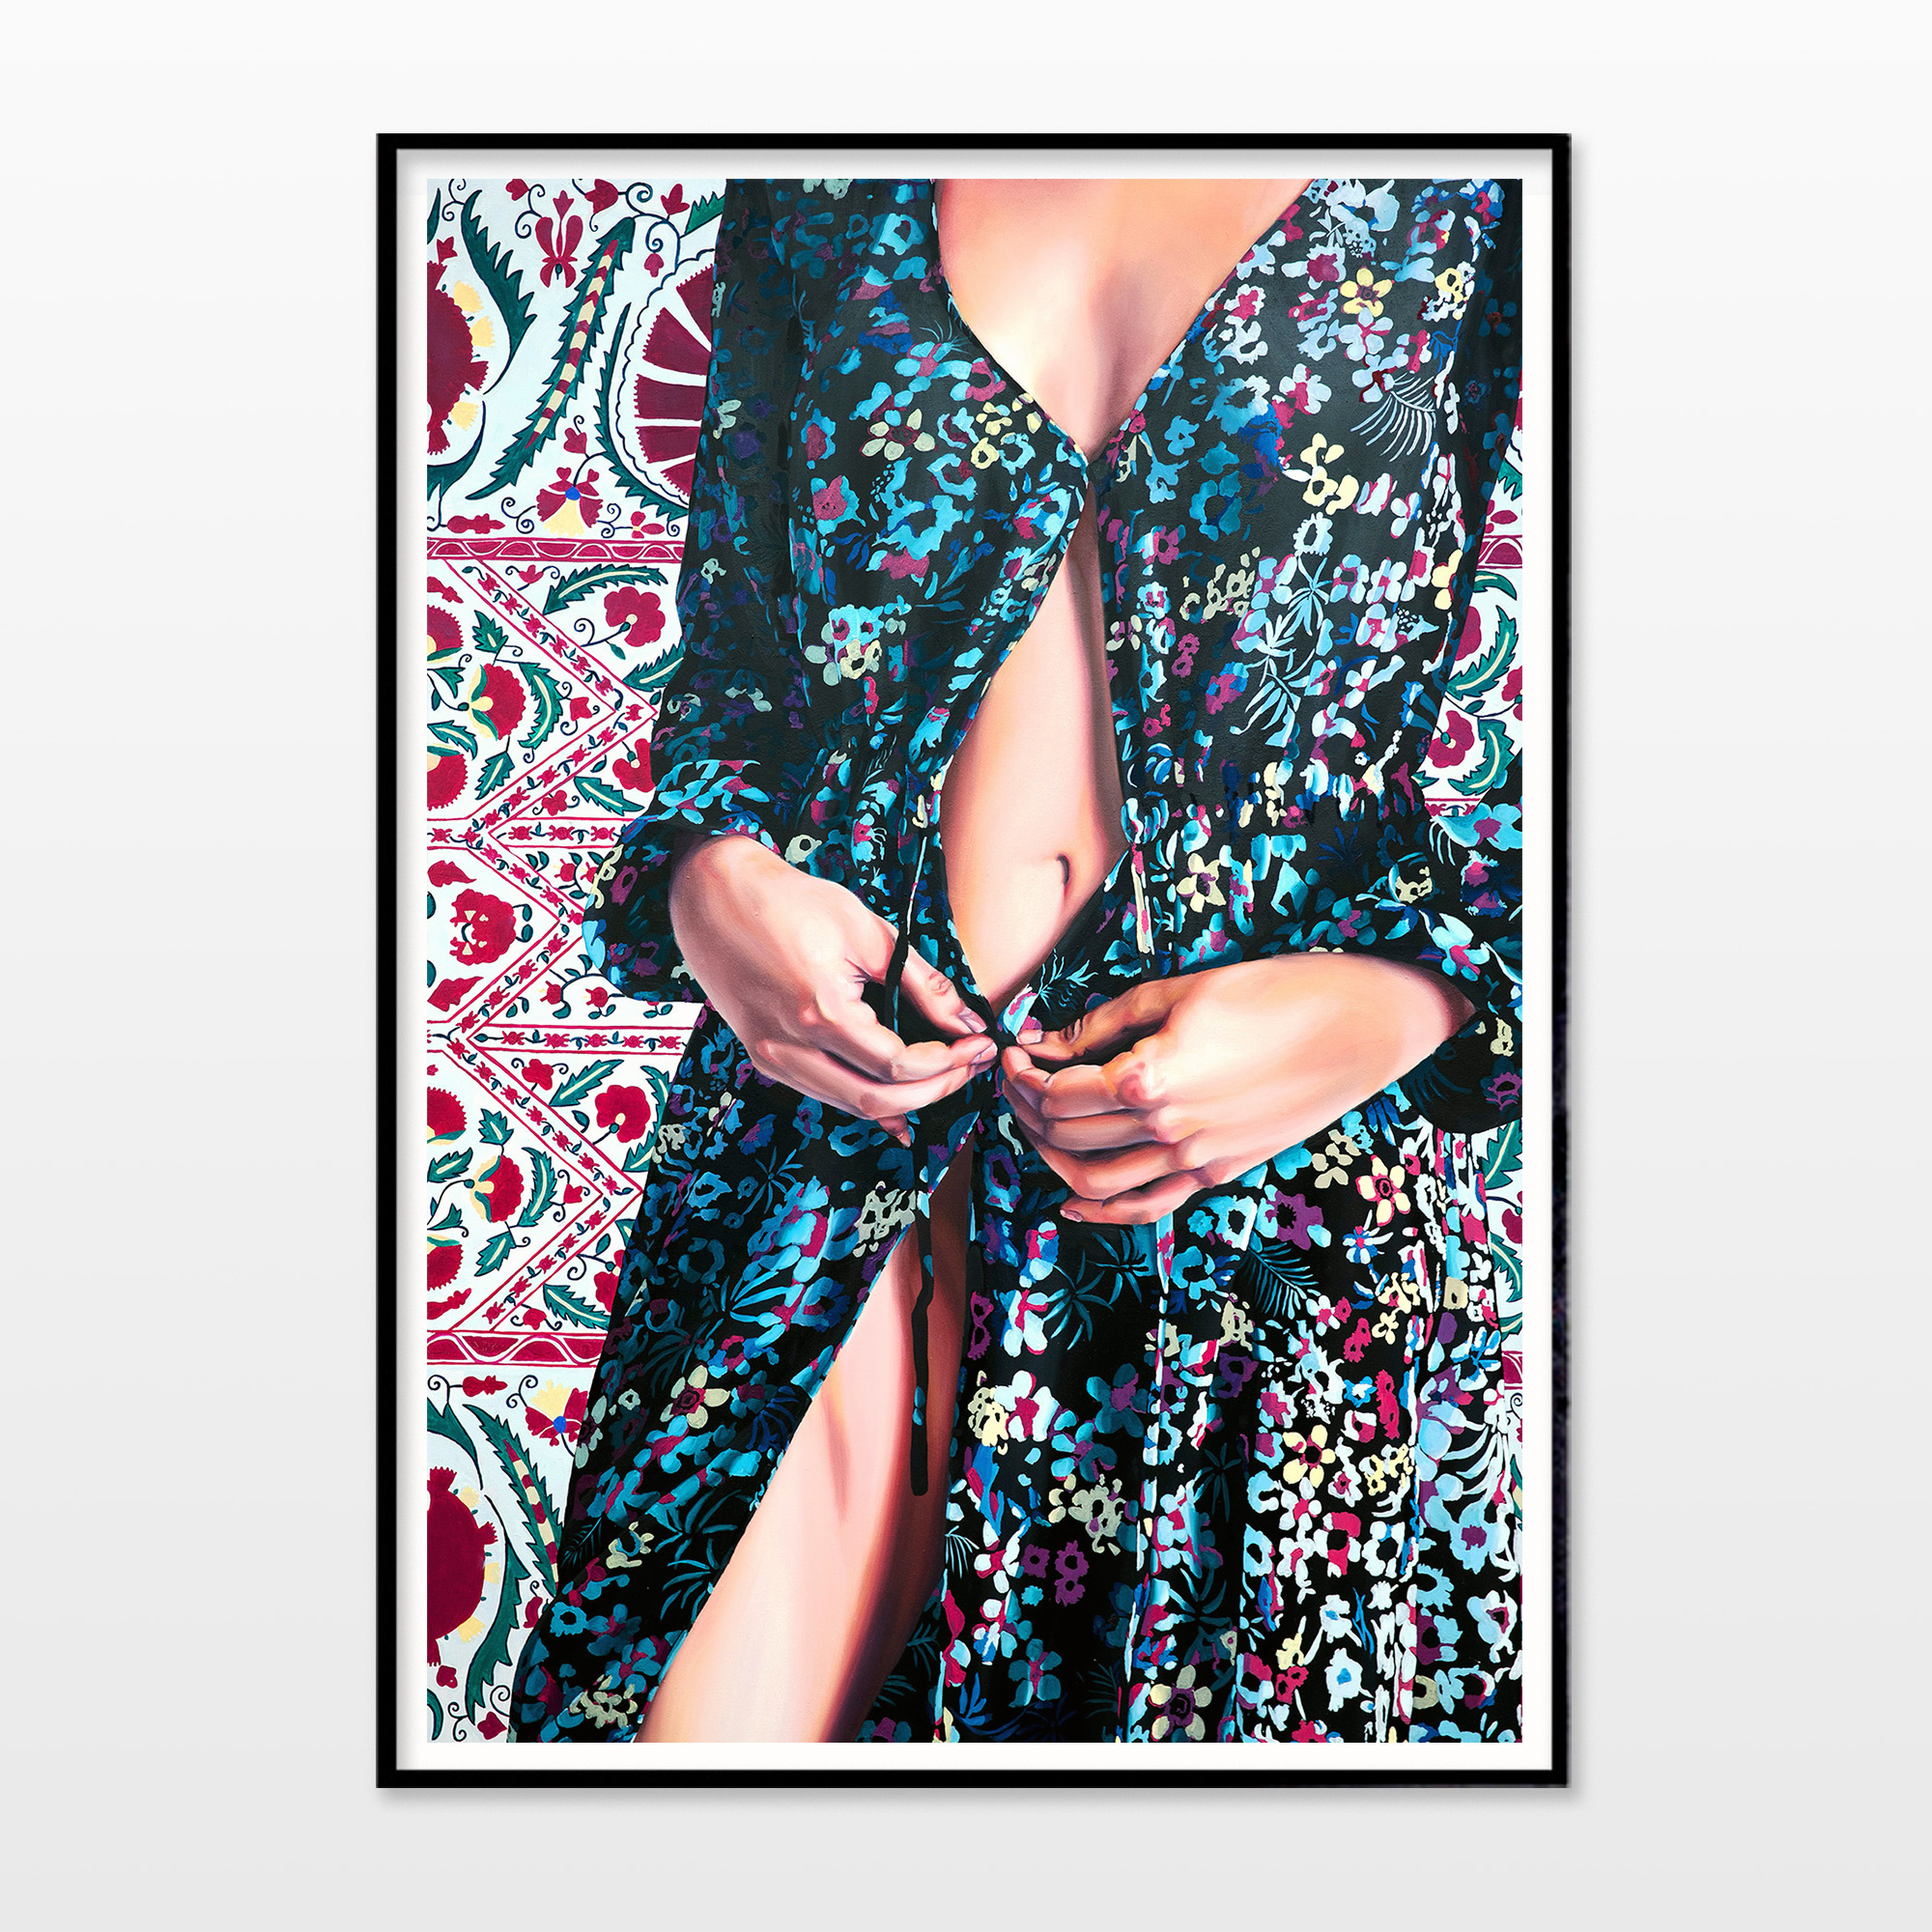 posters-prints, giclee-print, aesthetic, colorful, figurative, illustrative, portraiture, bodies, botany, patterns, people, sexuality, beige, blue, red, turquoise, ink, paper, beautiful, decorative, flowers, interior, interior-design, modern, modern-art, natural, women, Buy original high quality art. Paintings, drawings, limited edition prints & posters by talented artists.